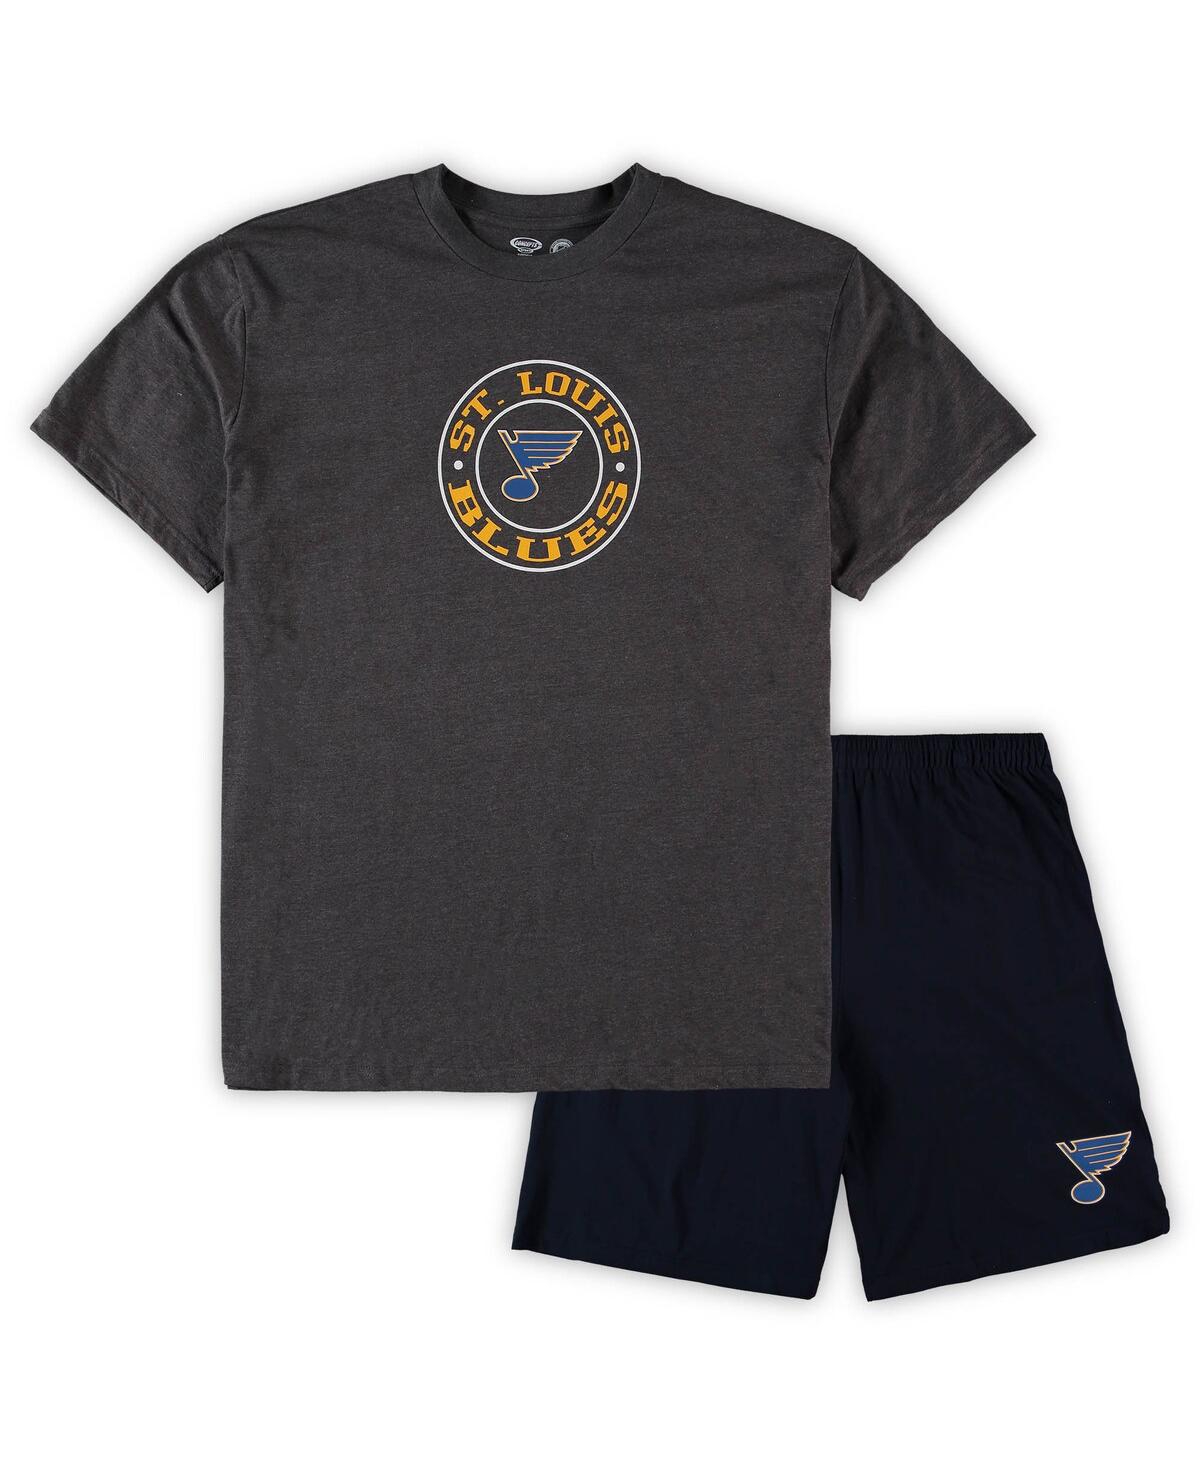 Men's Concepts Sport Blue, Heathered Charcoal St. Louis Blues Big and Tall T-shirt and Shorts Sleep Set - Blue, Heathered Charcoal